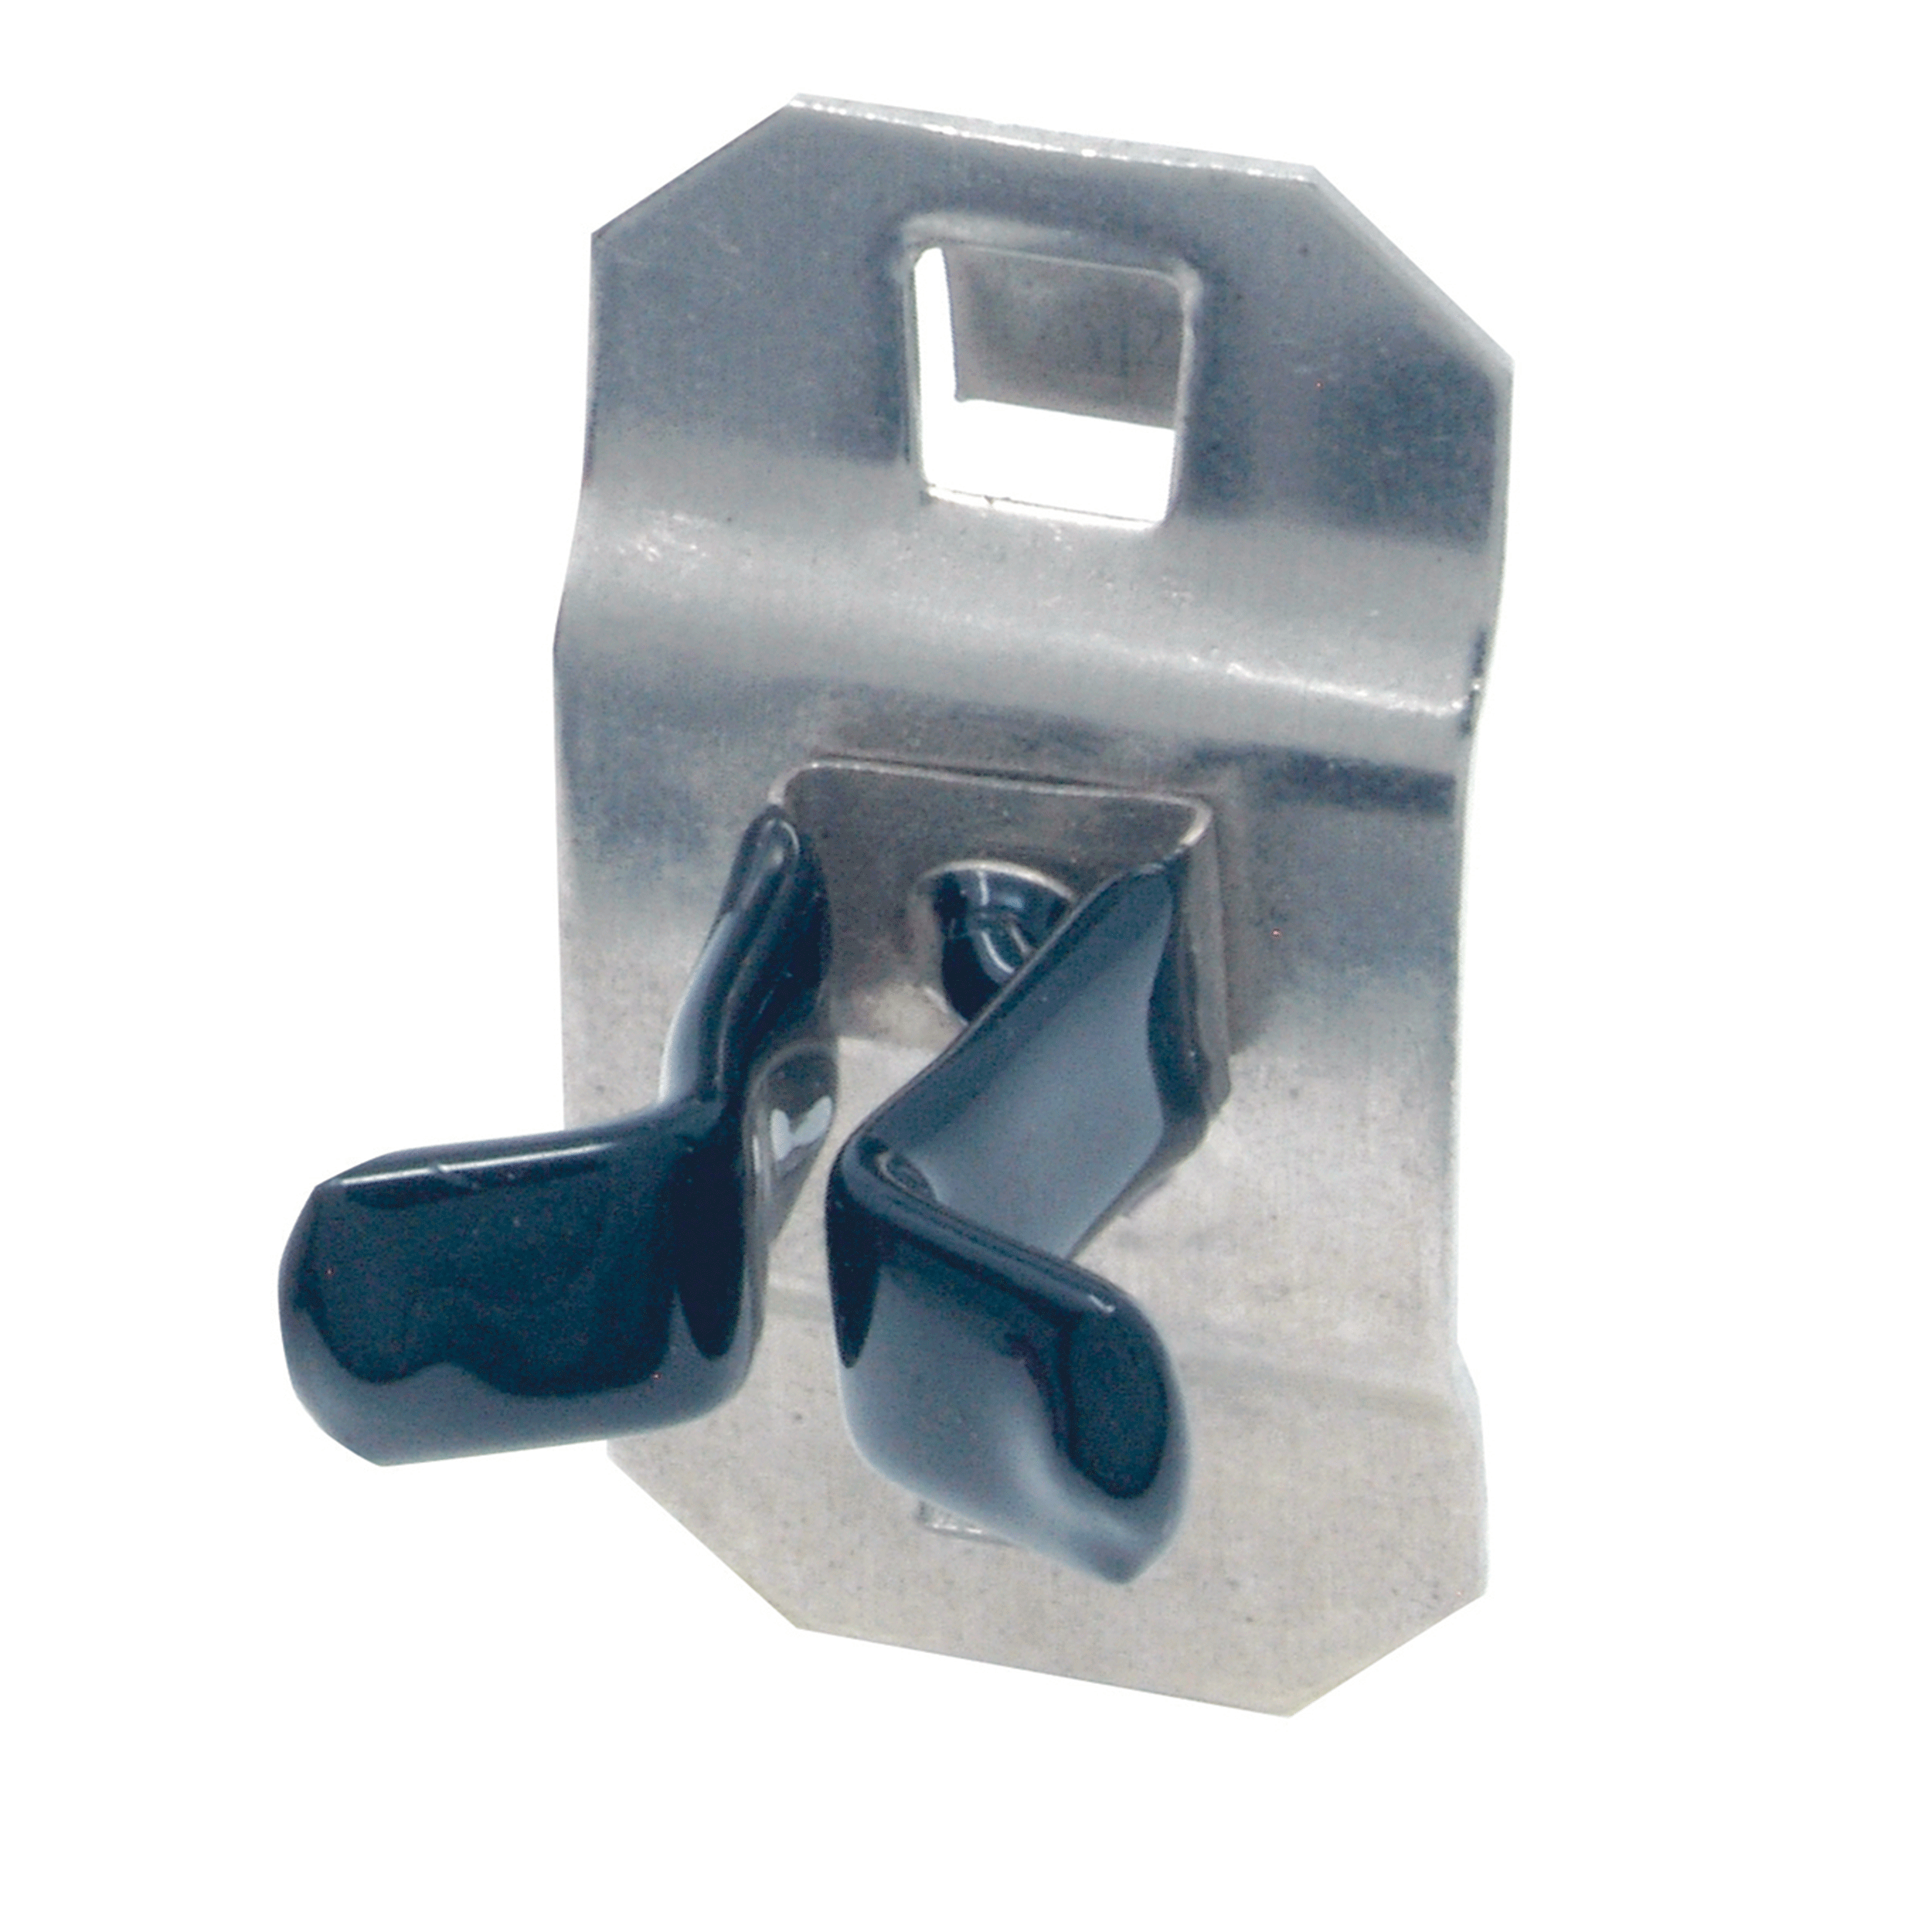 1/4 In. To 1/2 In. Hold Range 7/8 In. Proj. Vinyl Dipped Stainless Steel Extended Spring Clip For Ss Locboard, 3 Pack